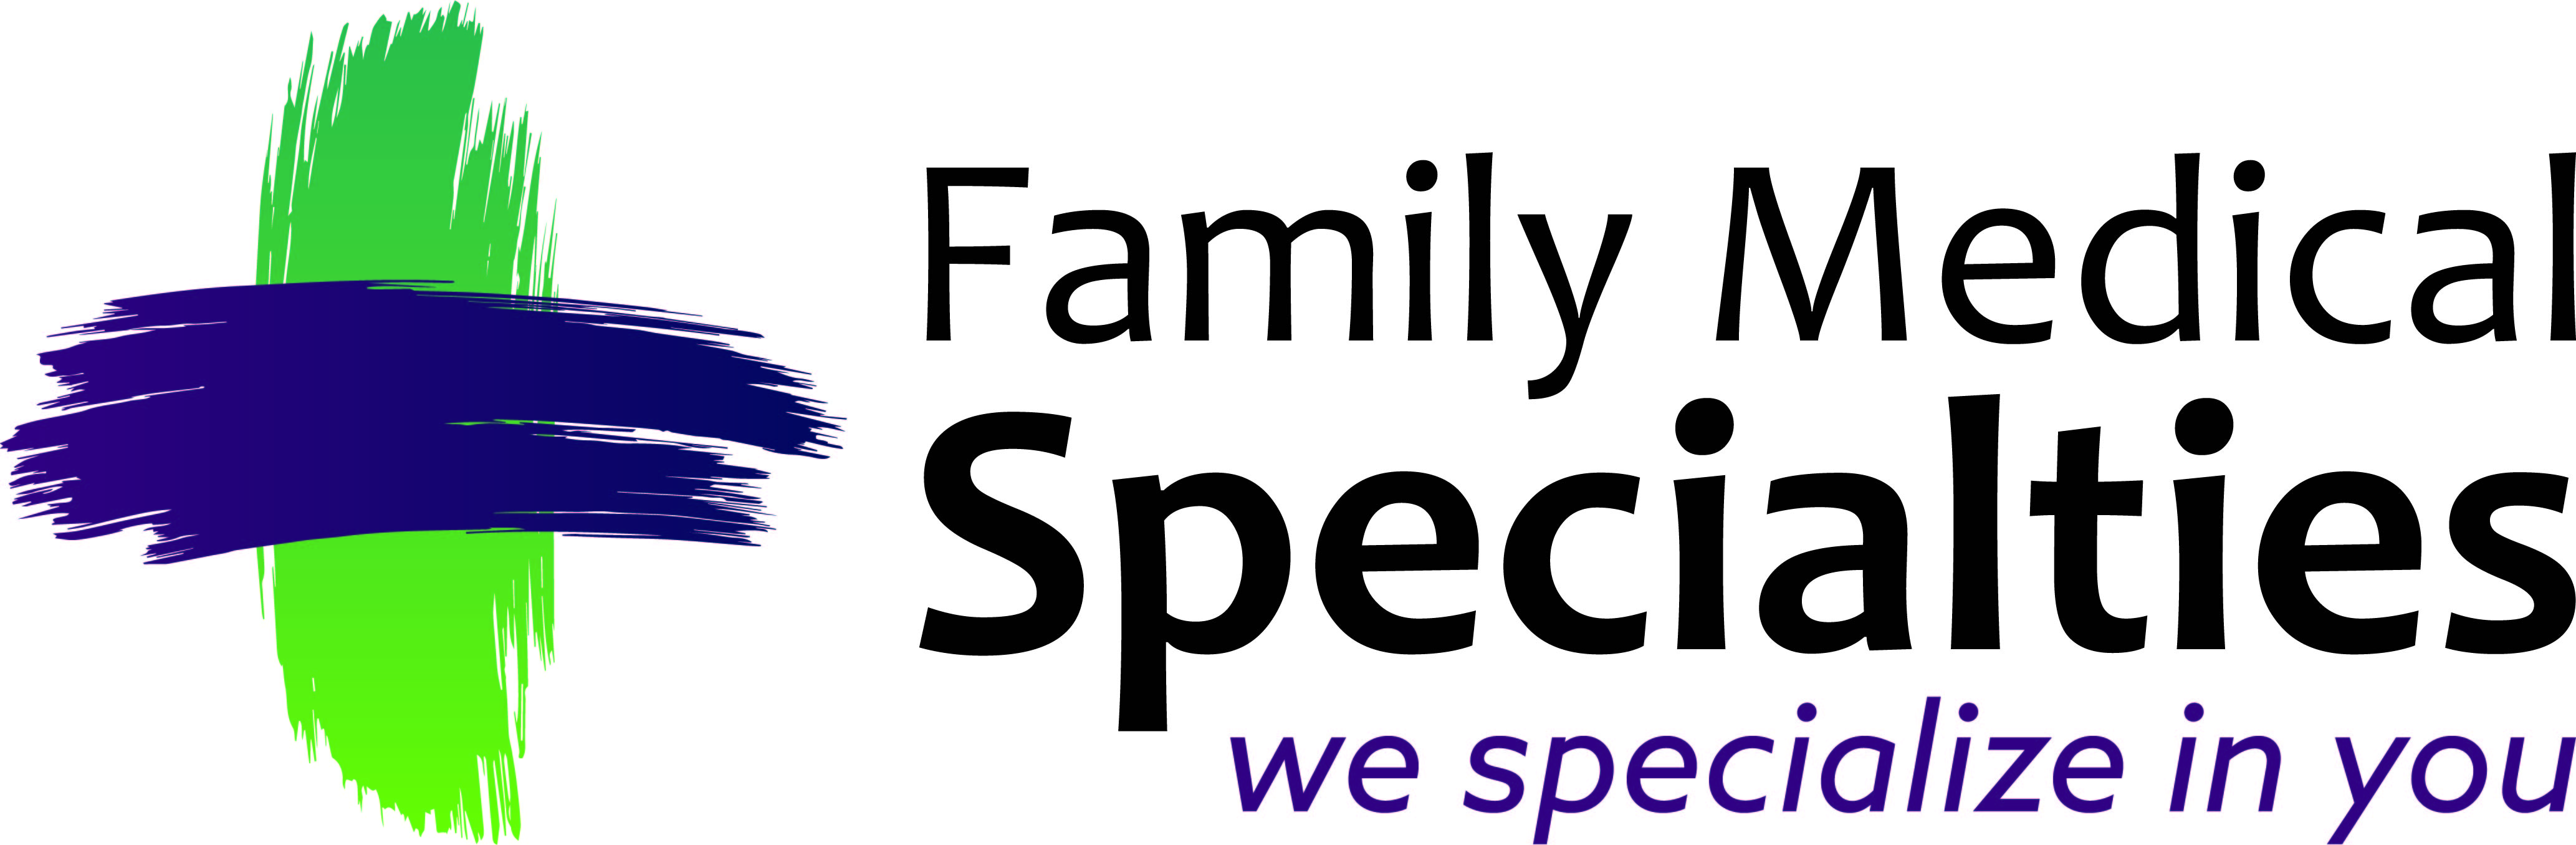 Family Medical Specialites